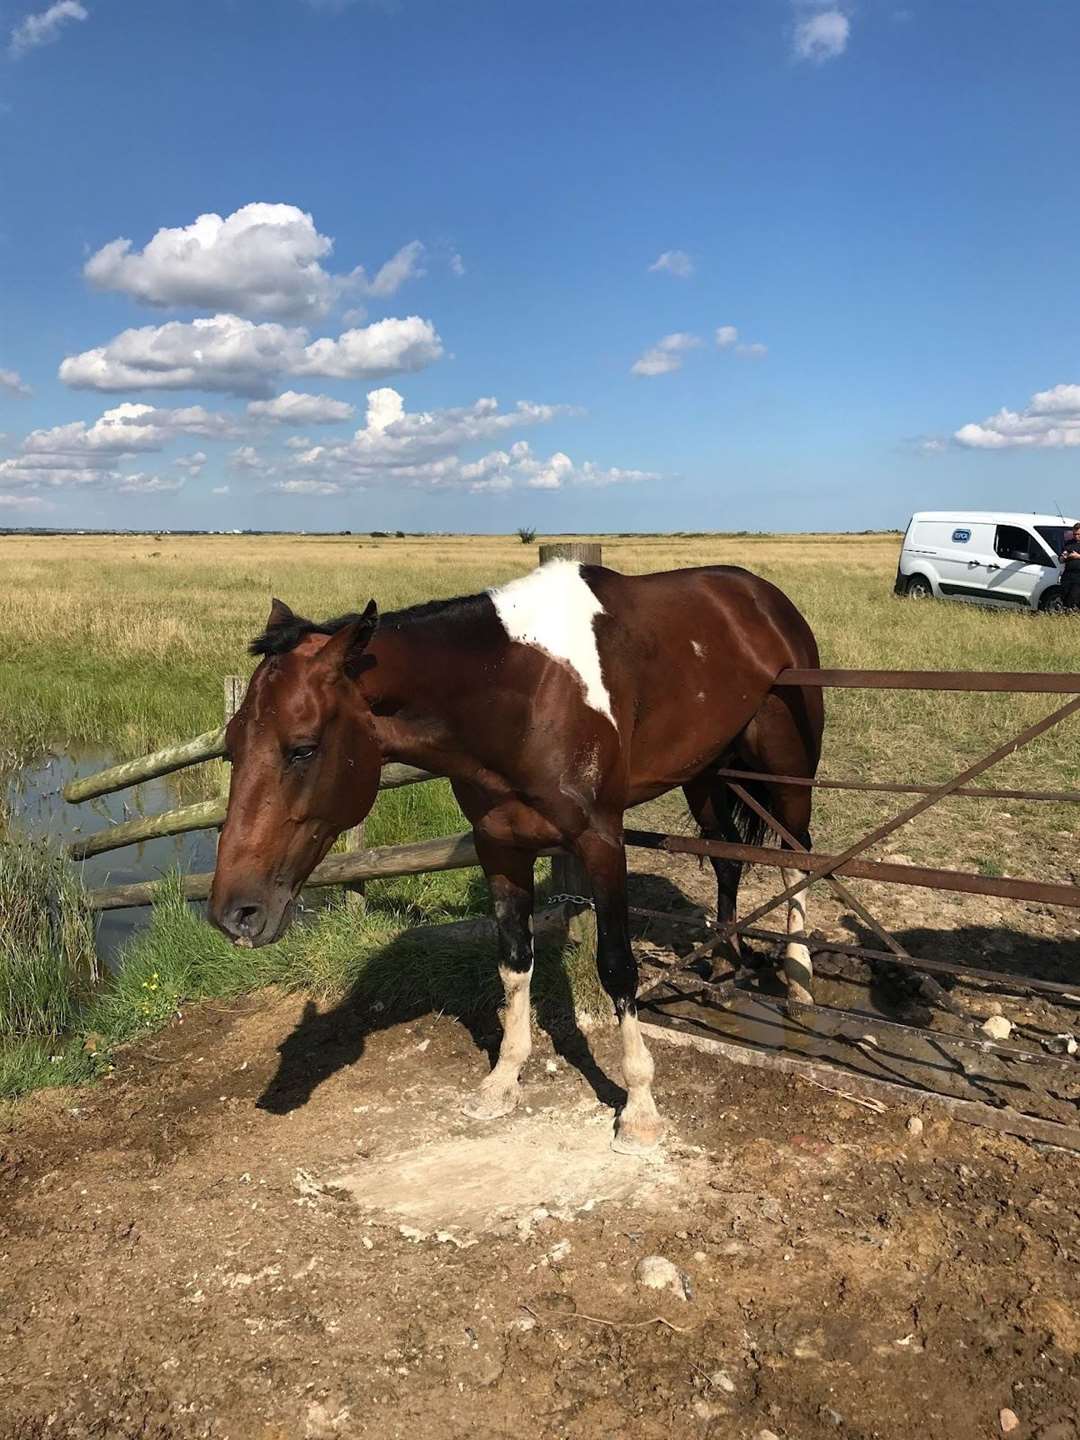 The horse that couldn't quite make it over the fence. Picture: RSPCA